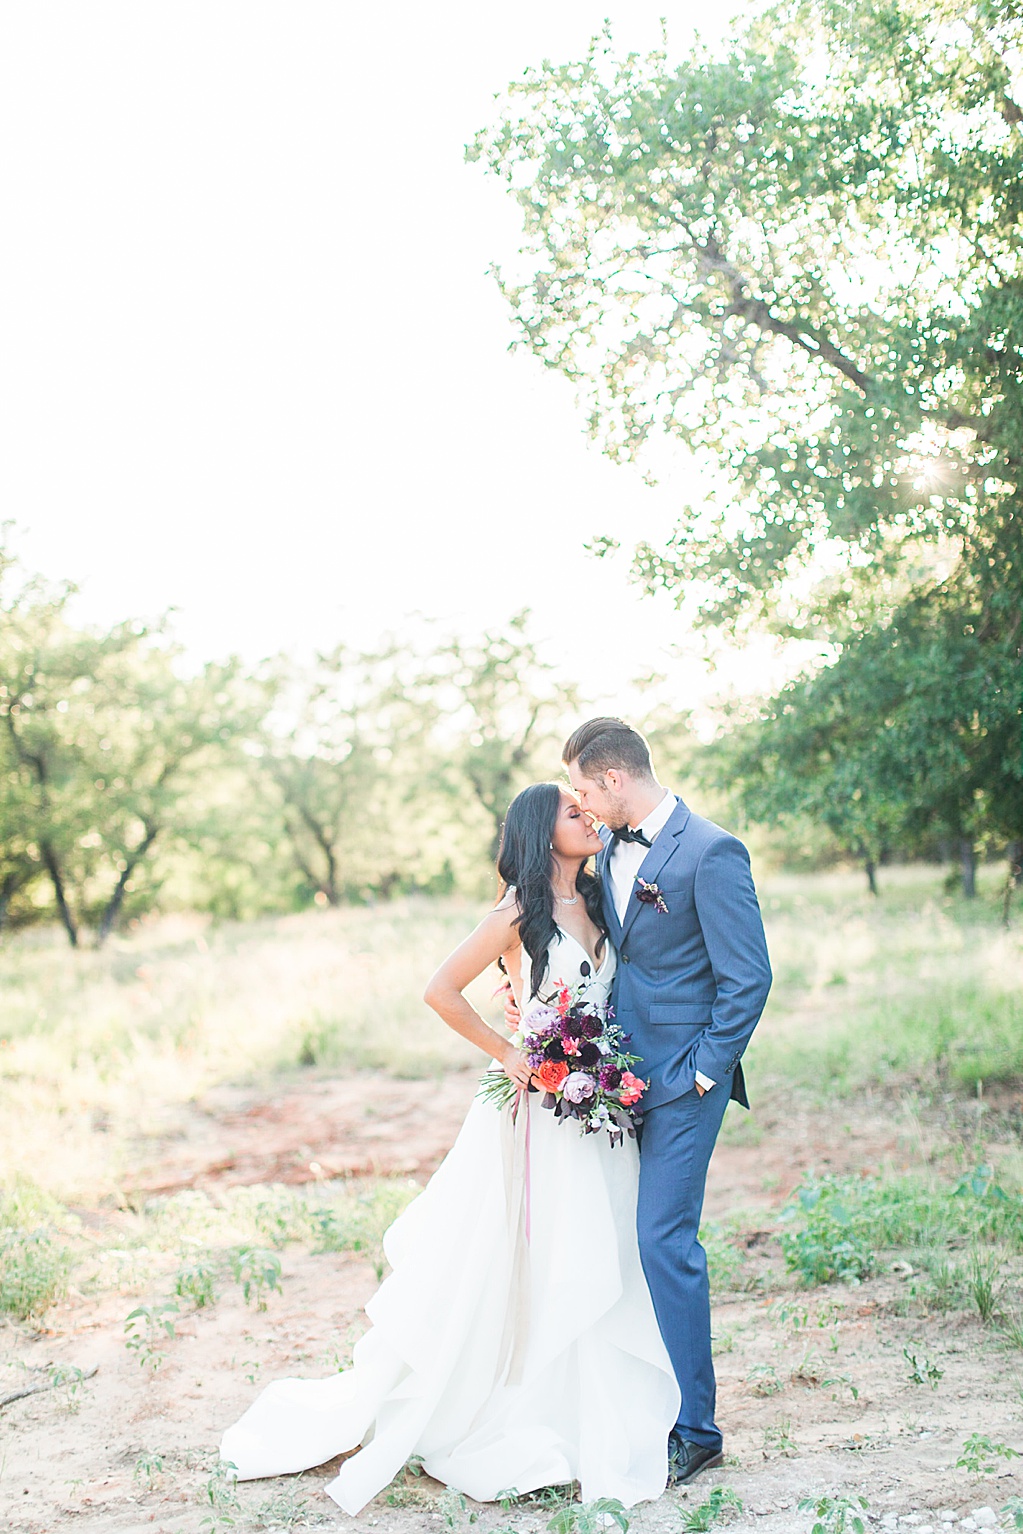 the barn at swallows eve wedding venue in fredericksburg texas photo inspiration featured on Grey Likes Weddings 0024